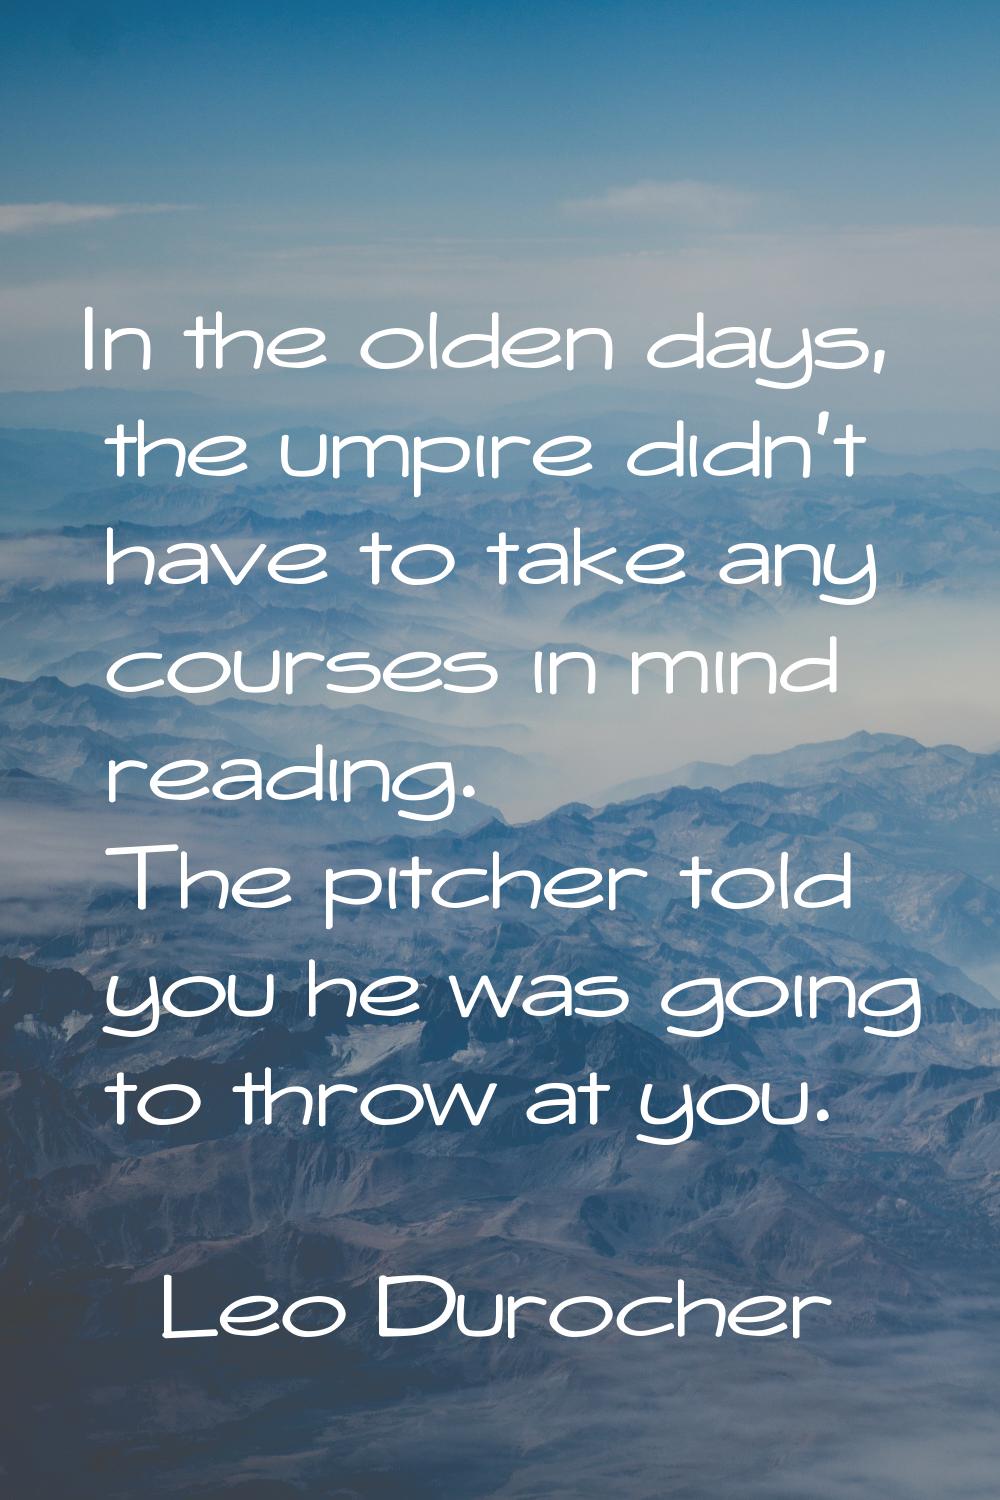 In the olden days, the umpire didn't have to take any courses in mind reading. The pitcher told you